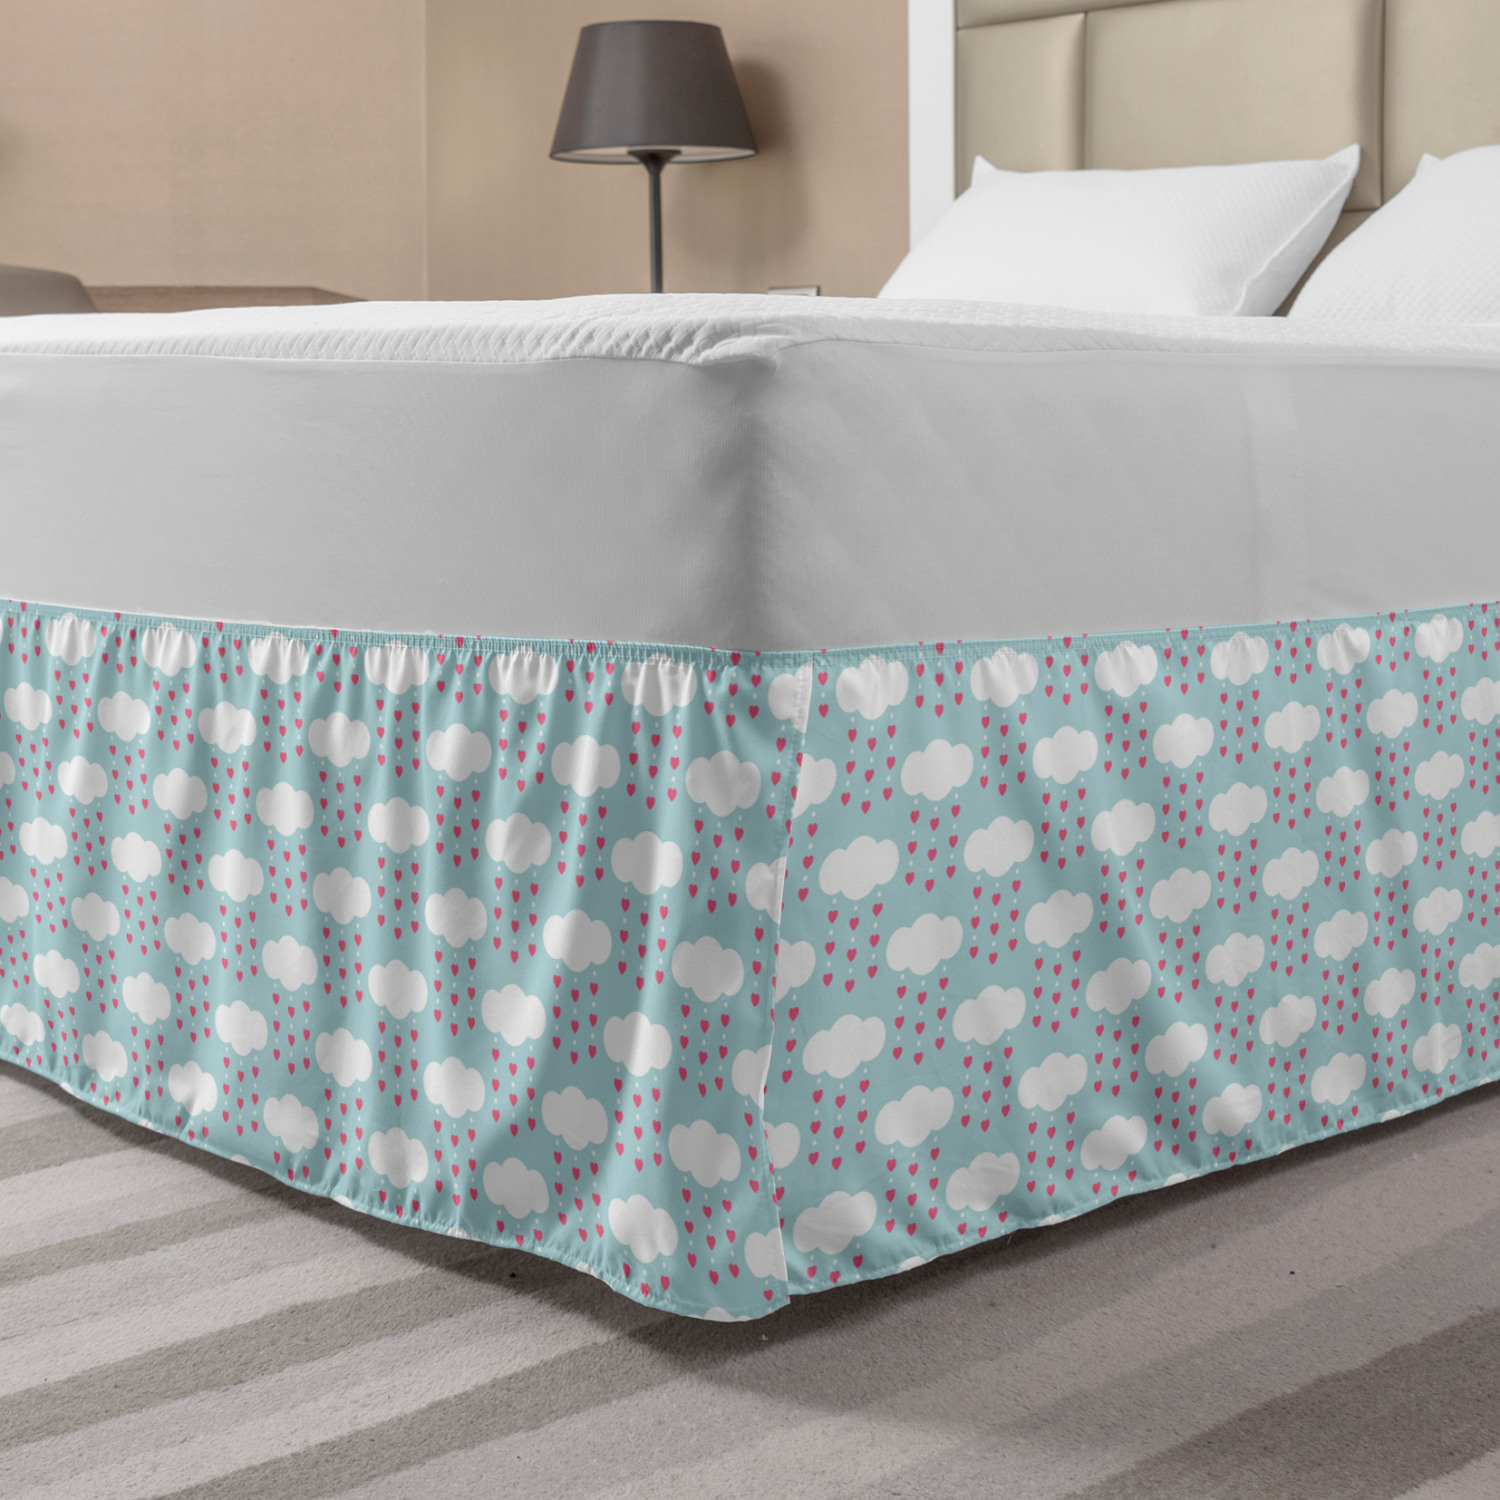 Hearts Bed Skirt, Pattern of Clouds with Hearts Hanging Retro Style ...